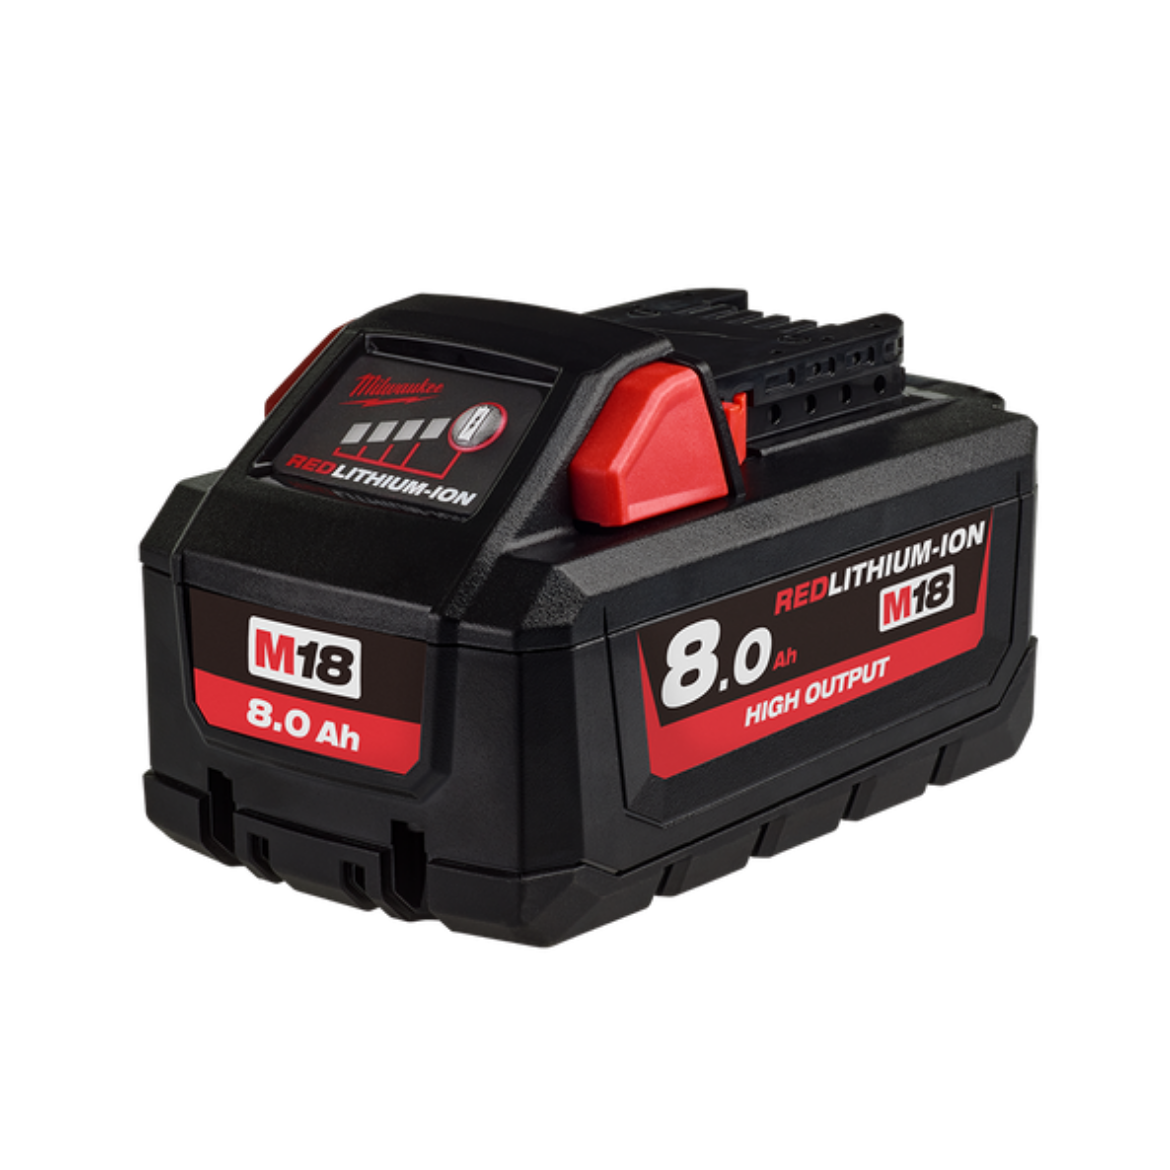 Picture of MILWAUKEE 18V 8.0AH BATTERY REDLITHIUM-ION HIGH OUTPUT